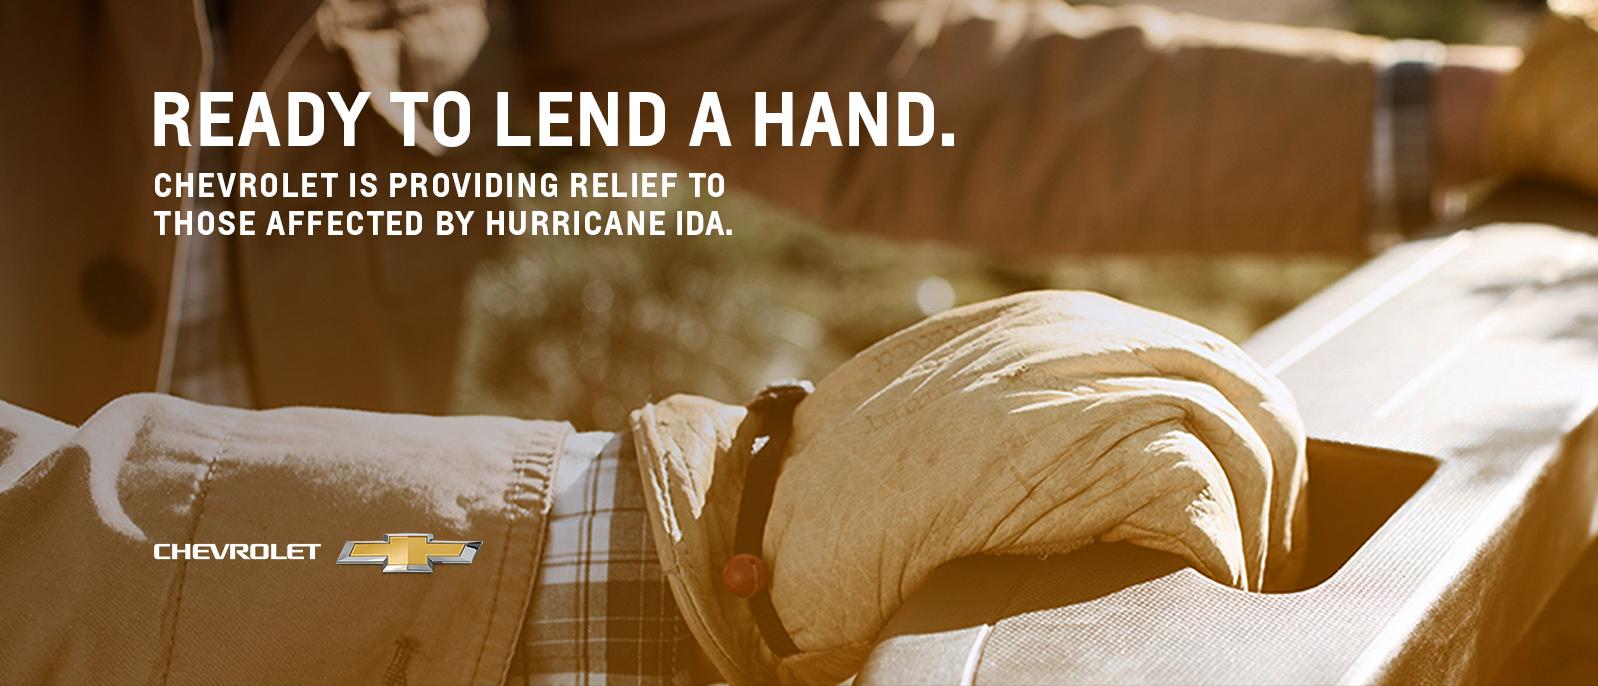 Chevrolet is lending a hand to those affected by Hurricane Ida